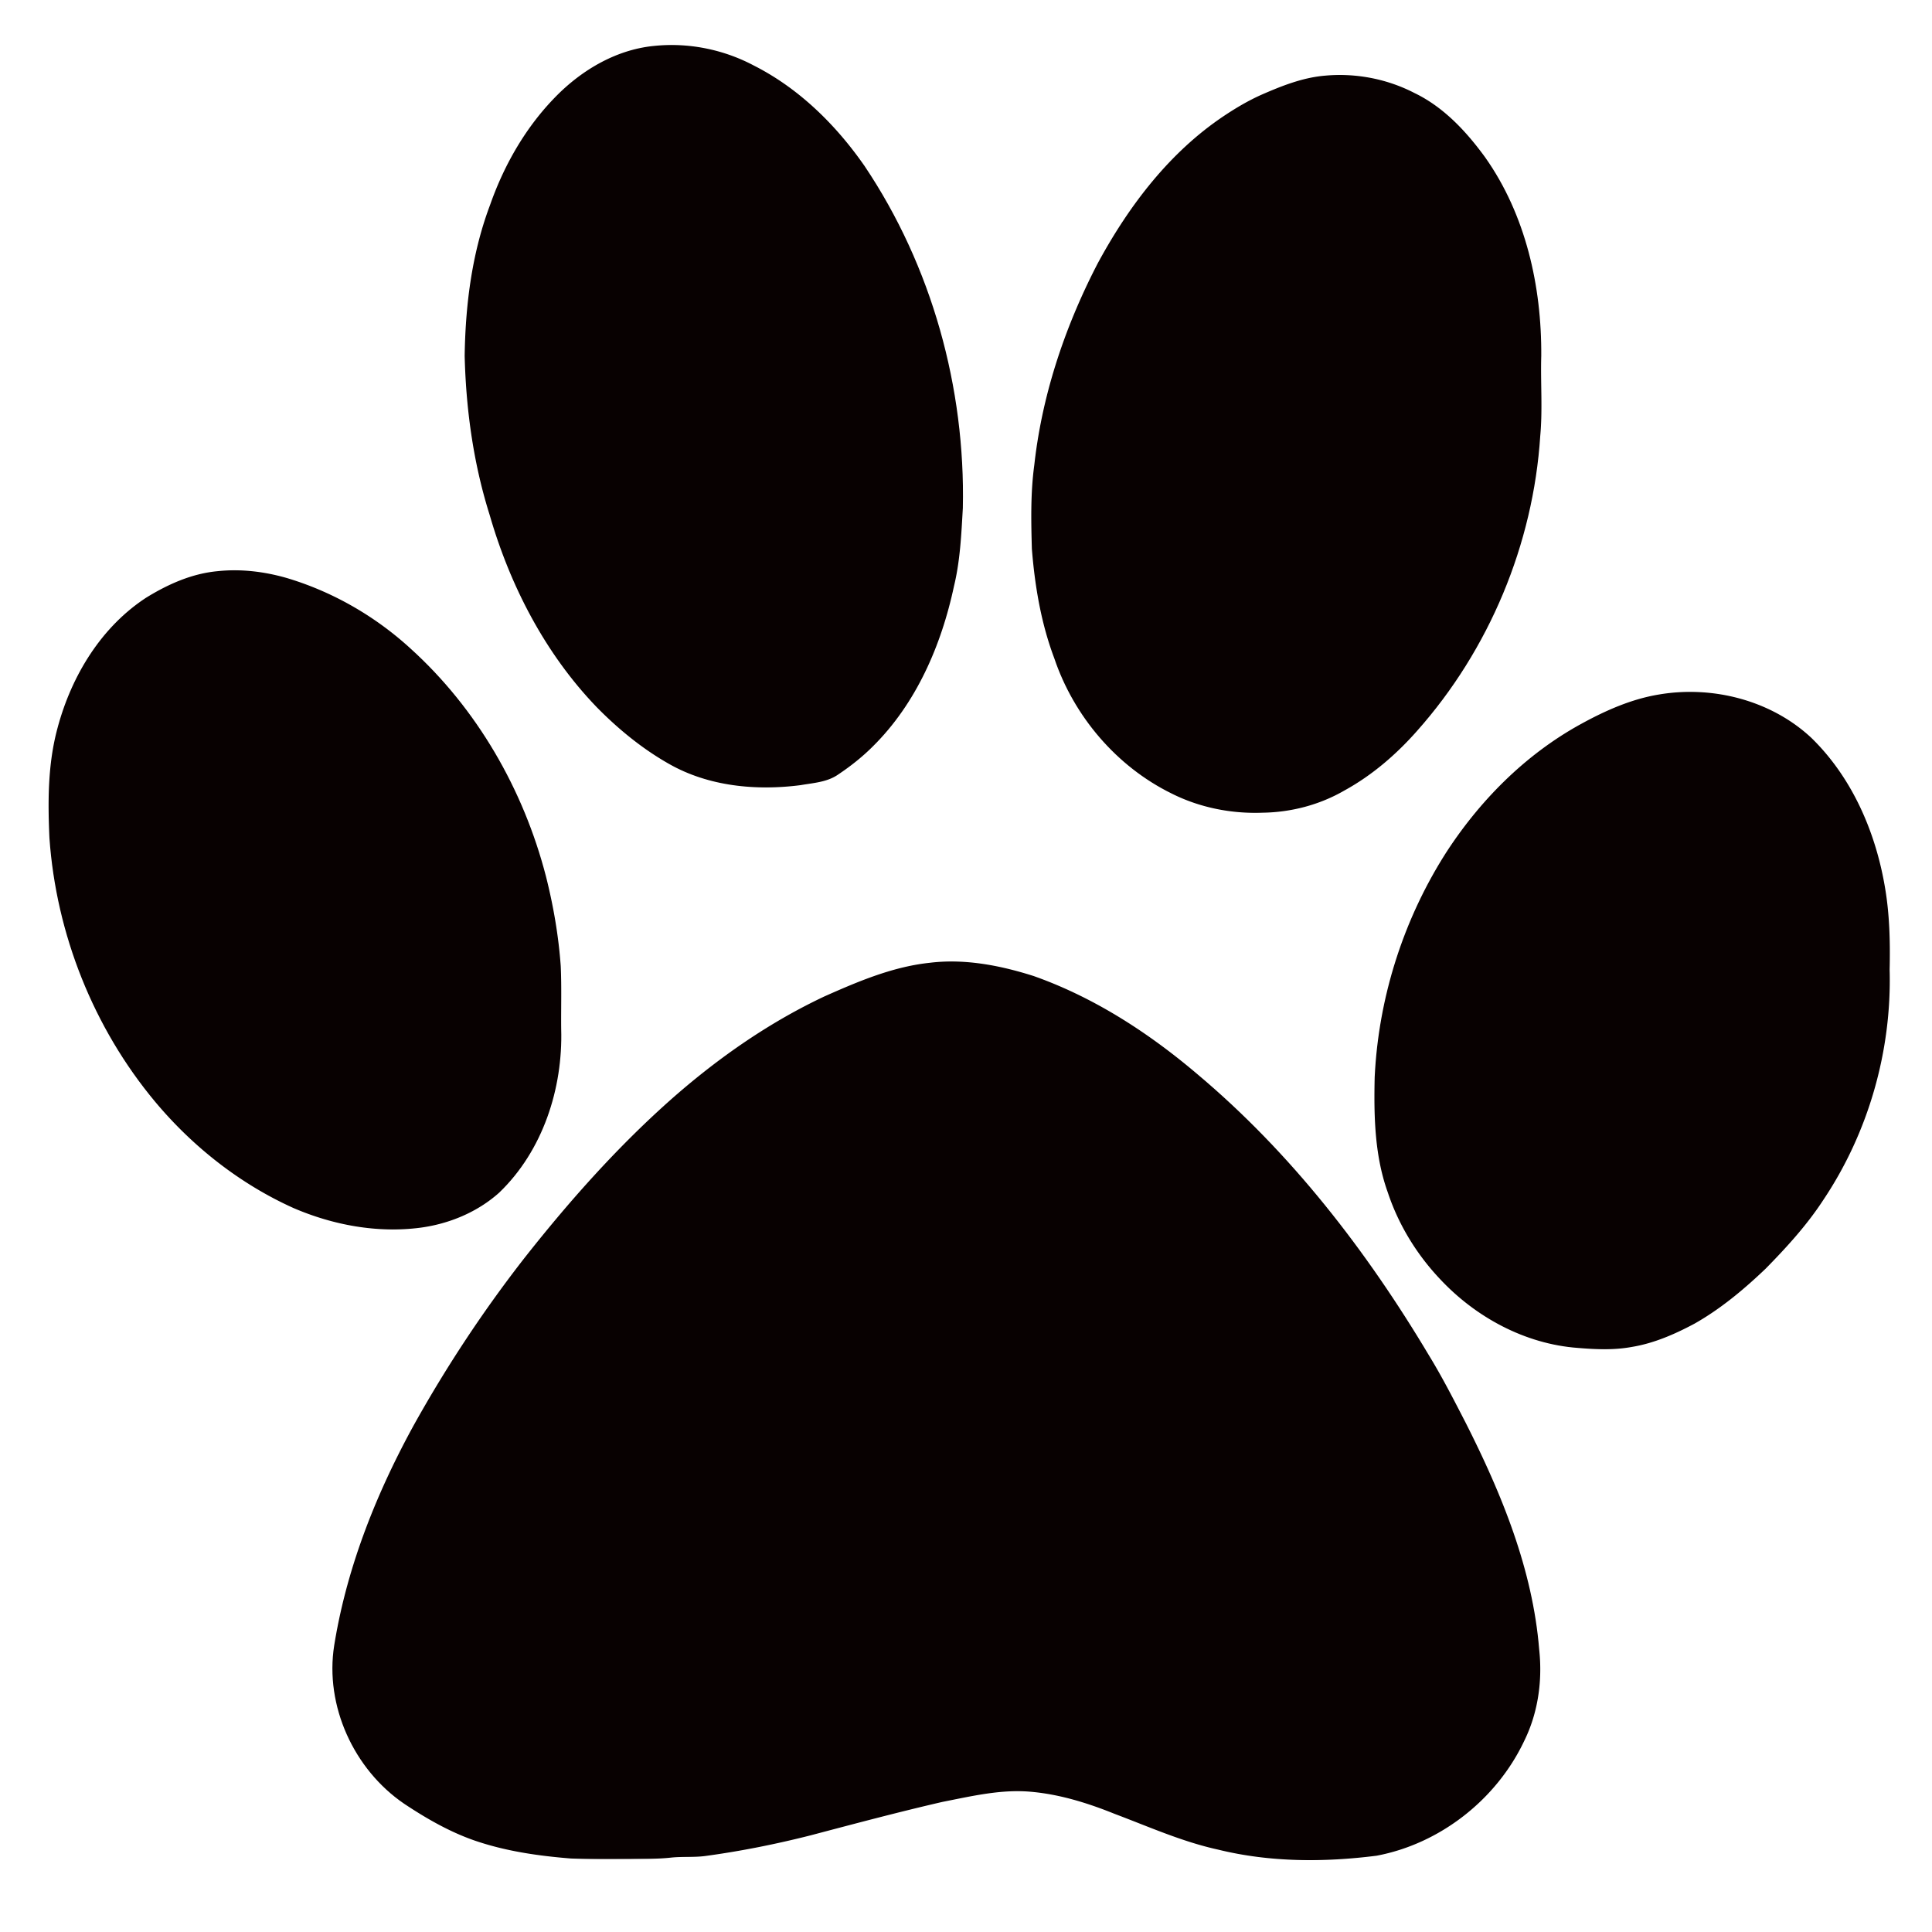 Clipart cougar paw prints free